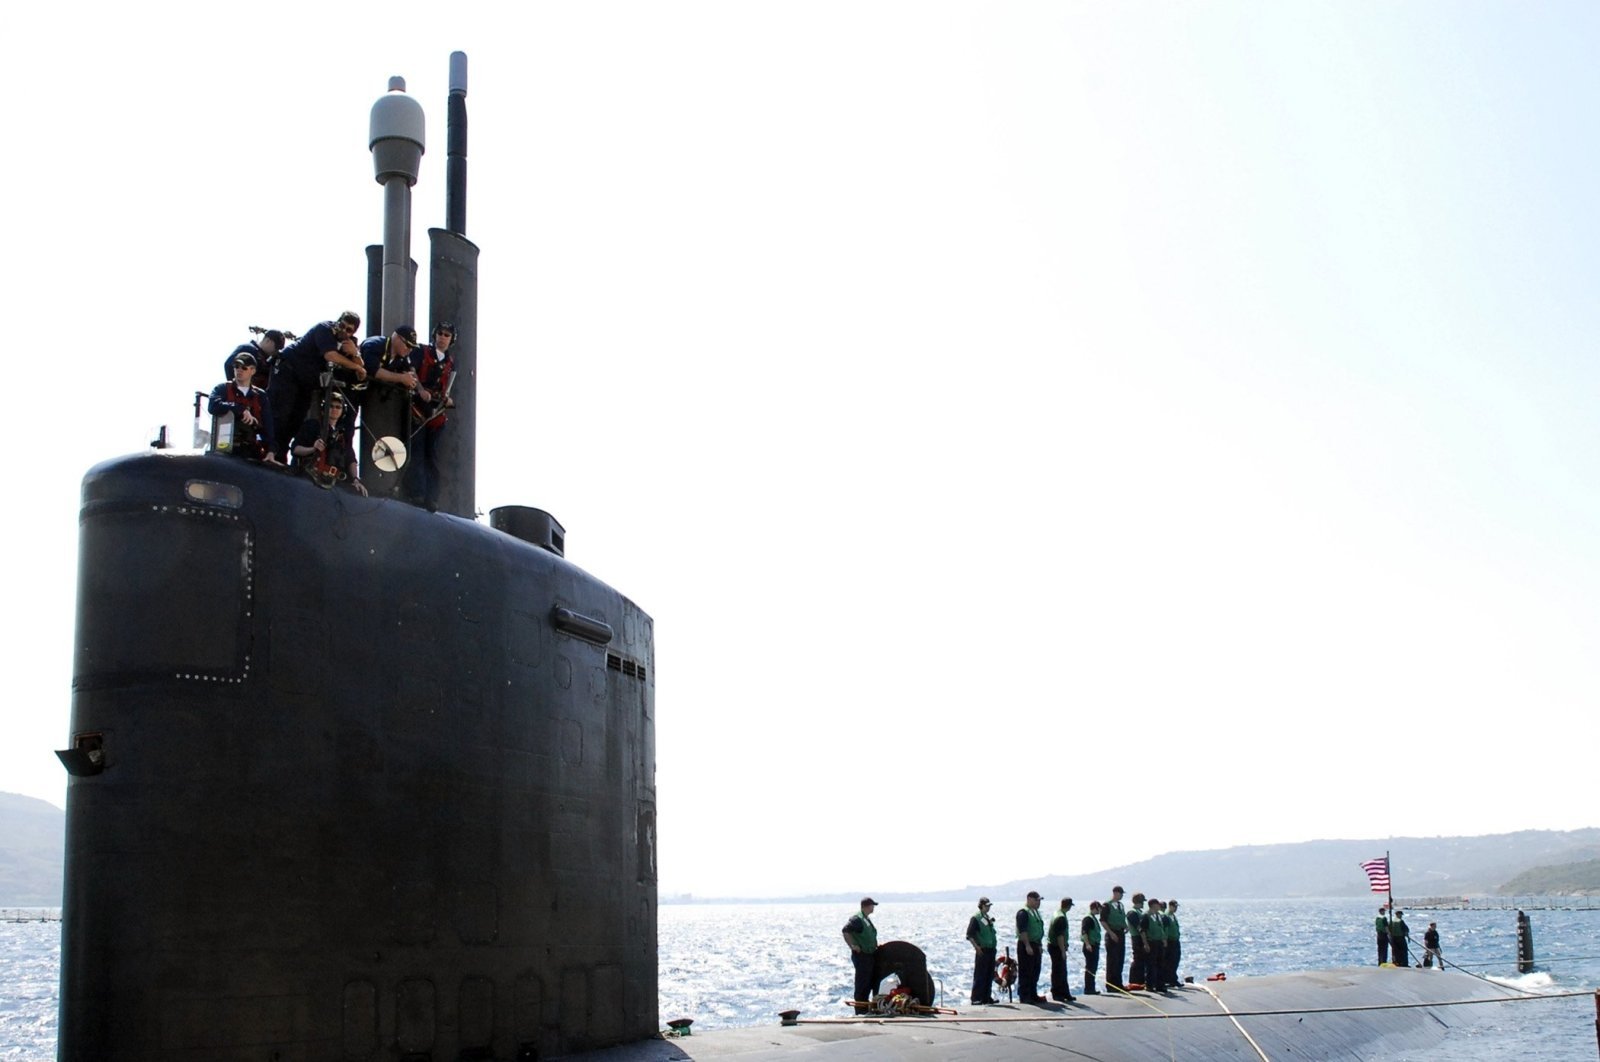 The USS San Juan arrives for a routine port visit in Souda Bay, Crete, Greece, May 22, 2007. (U.S. Navy Handout Photo)